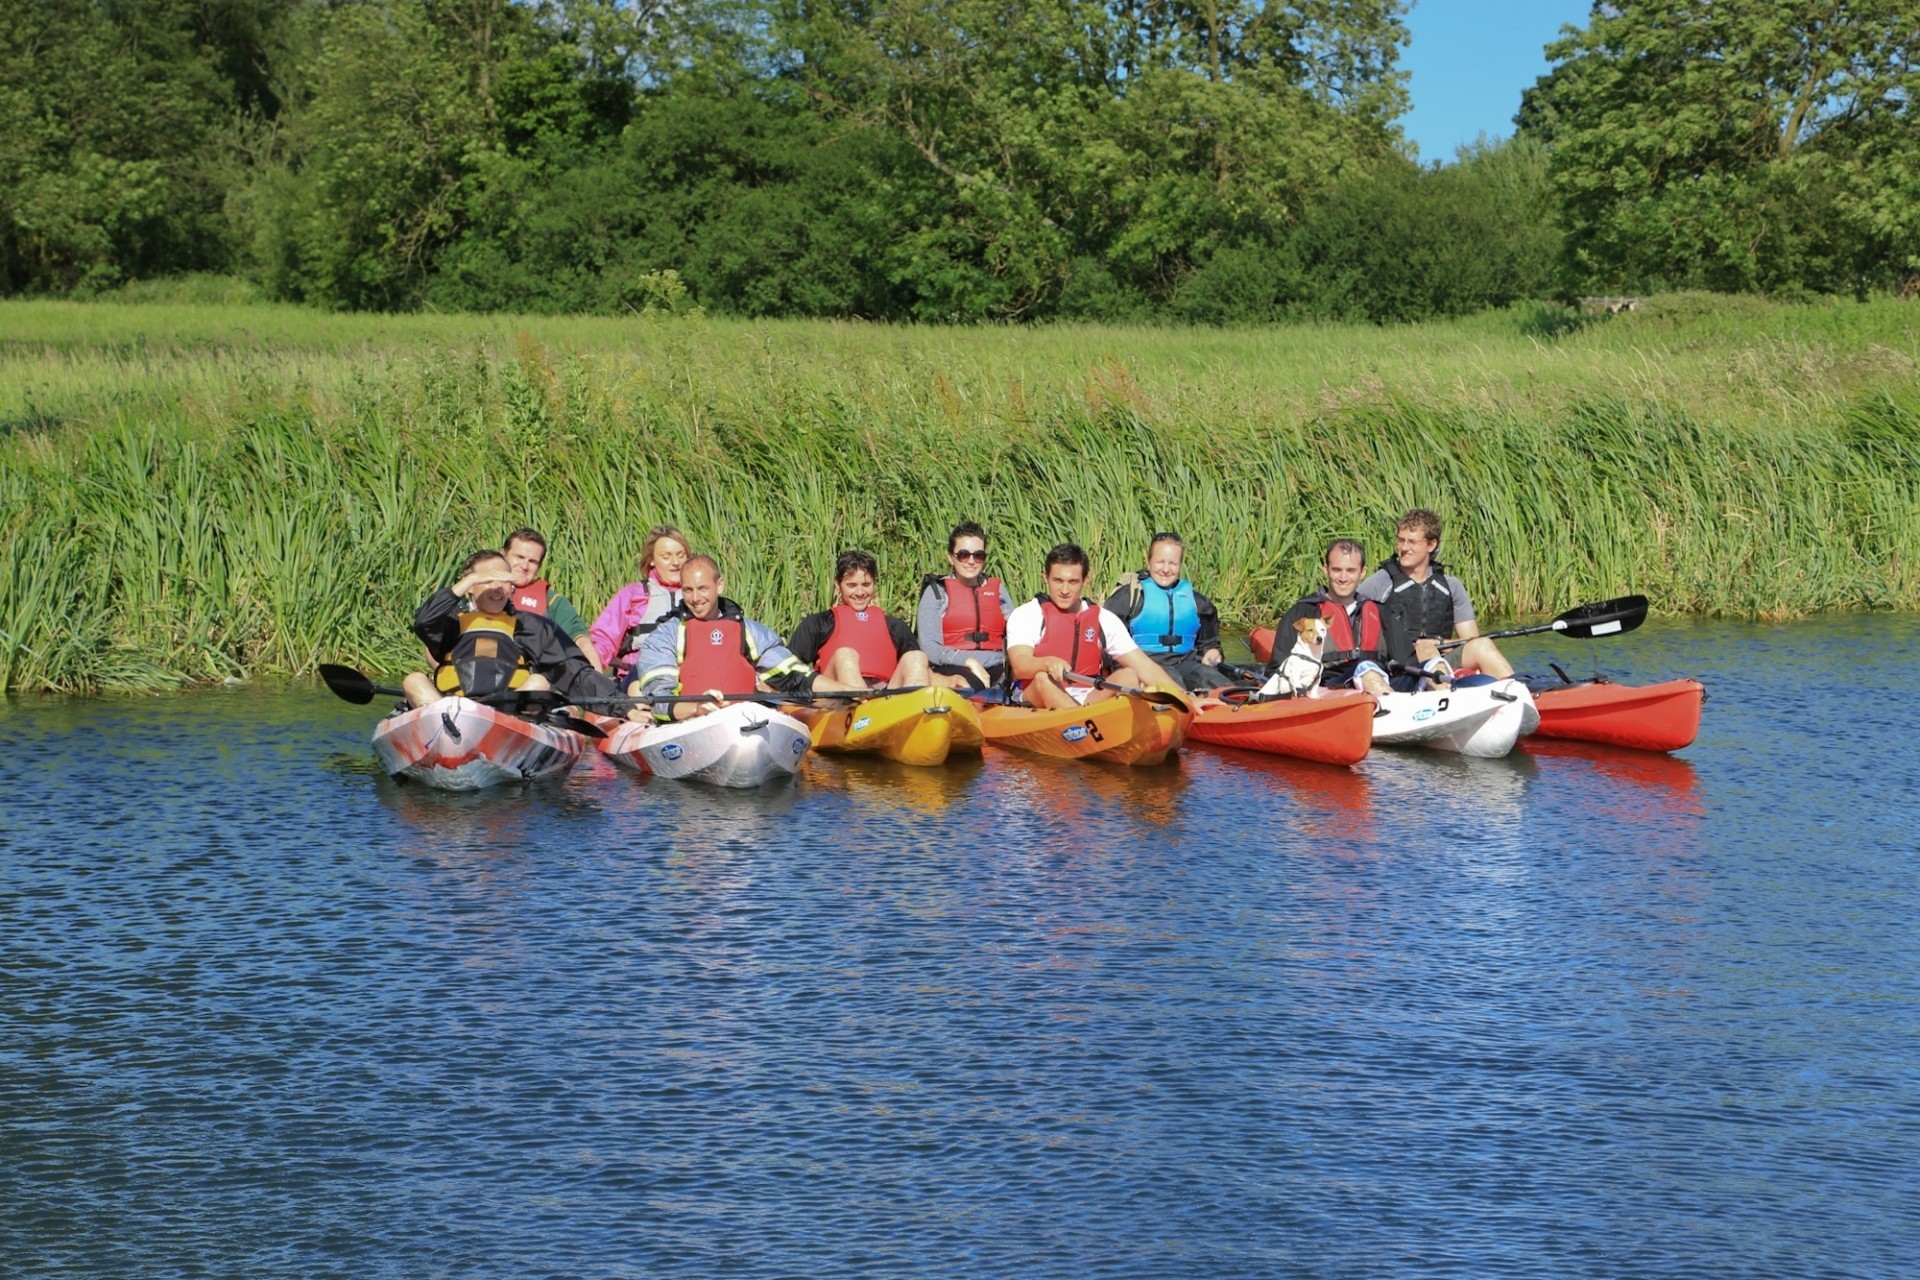 A large group of kayakers on a blue river with thick green grass in the background